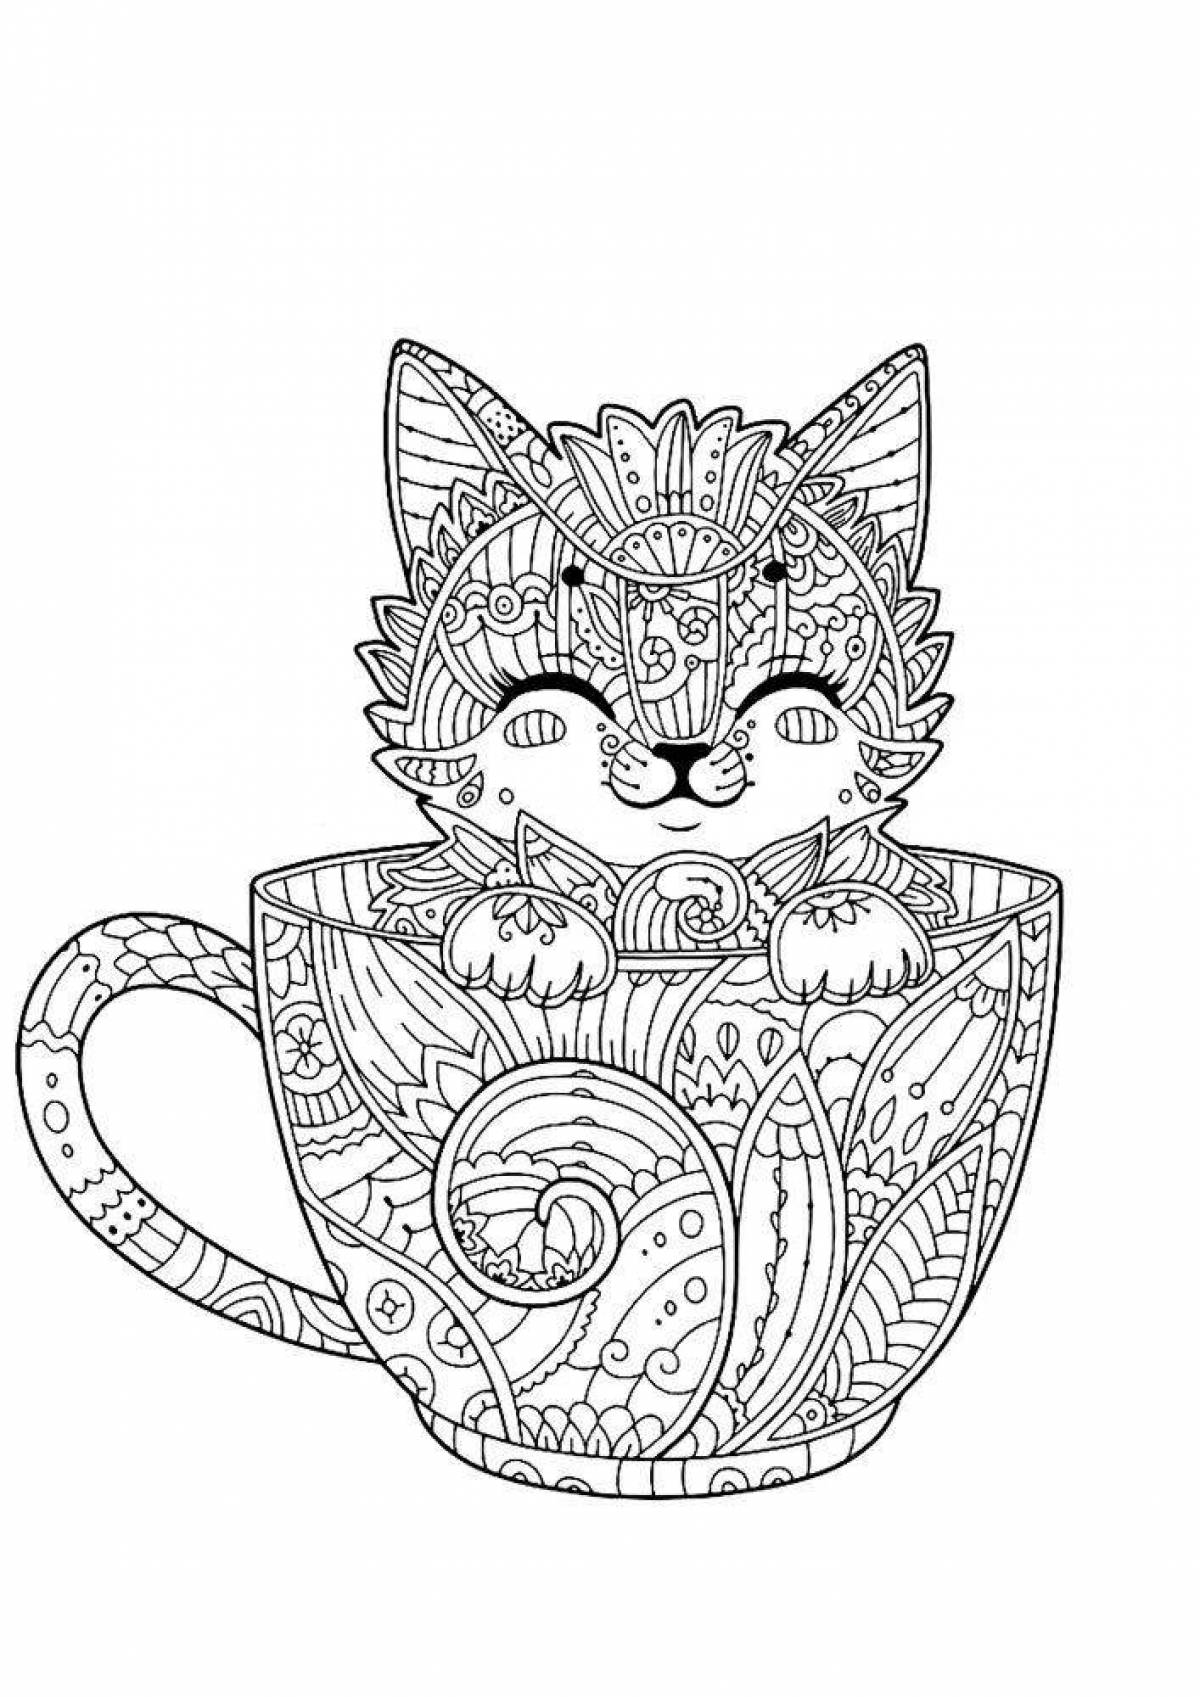 Coloring page playful cat in a mug